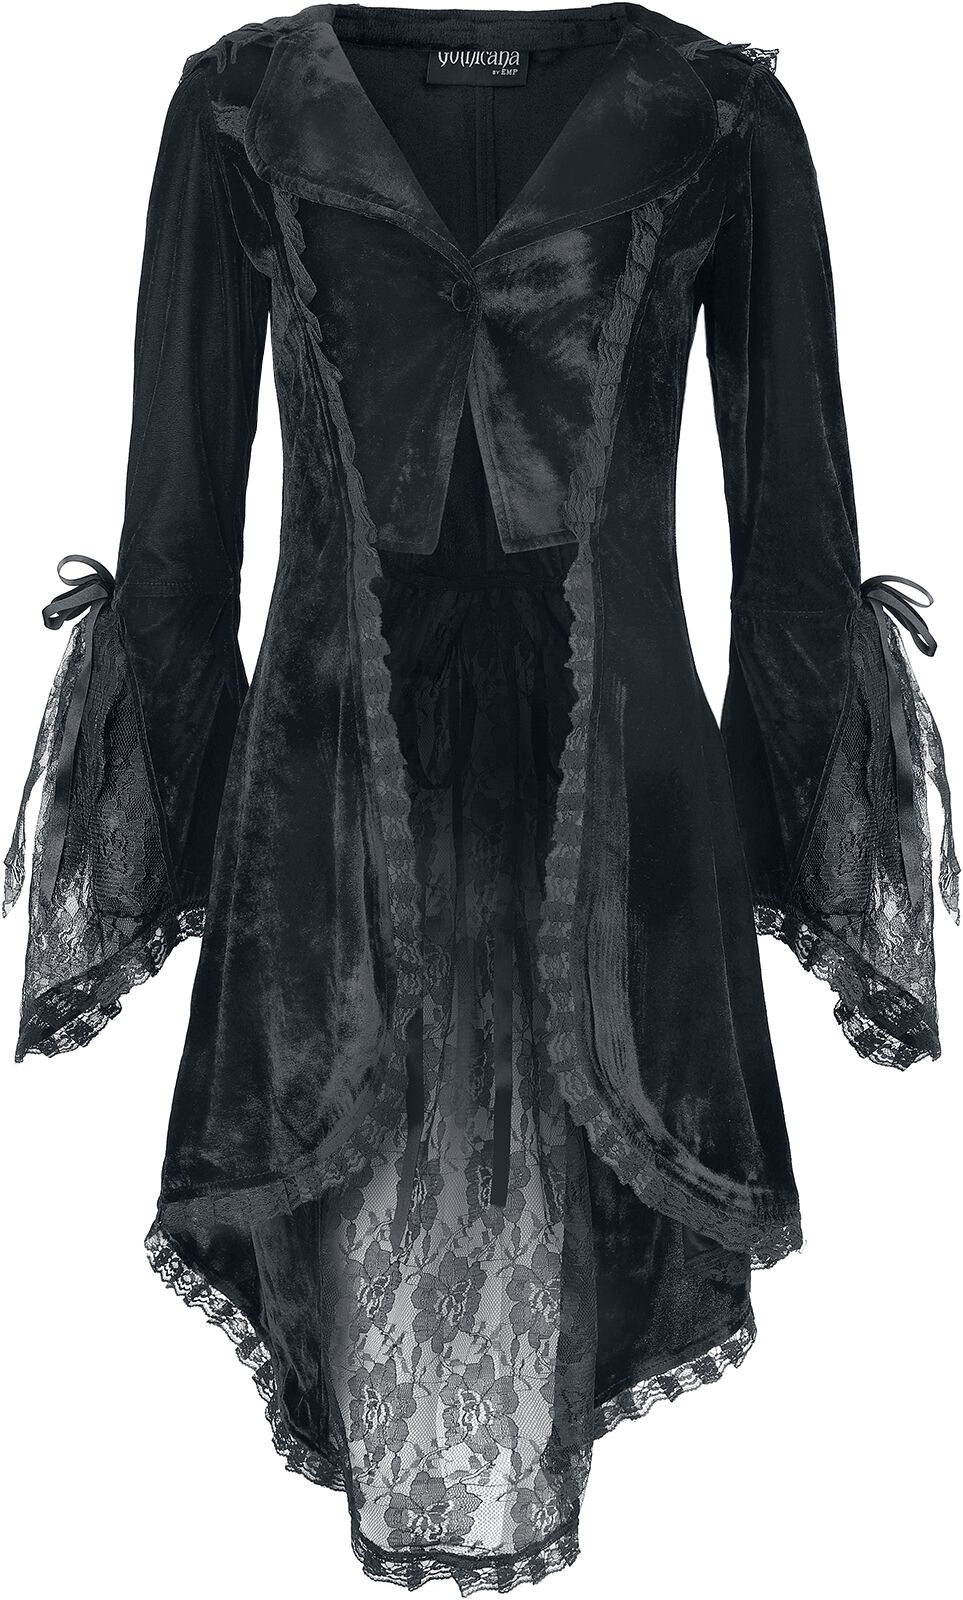 Image of Cardigan Gothic di Gothicana by EMP - Velvet cardigan with lace details - M a L - Donna - nero